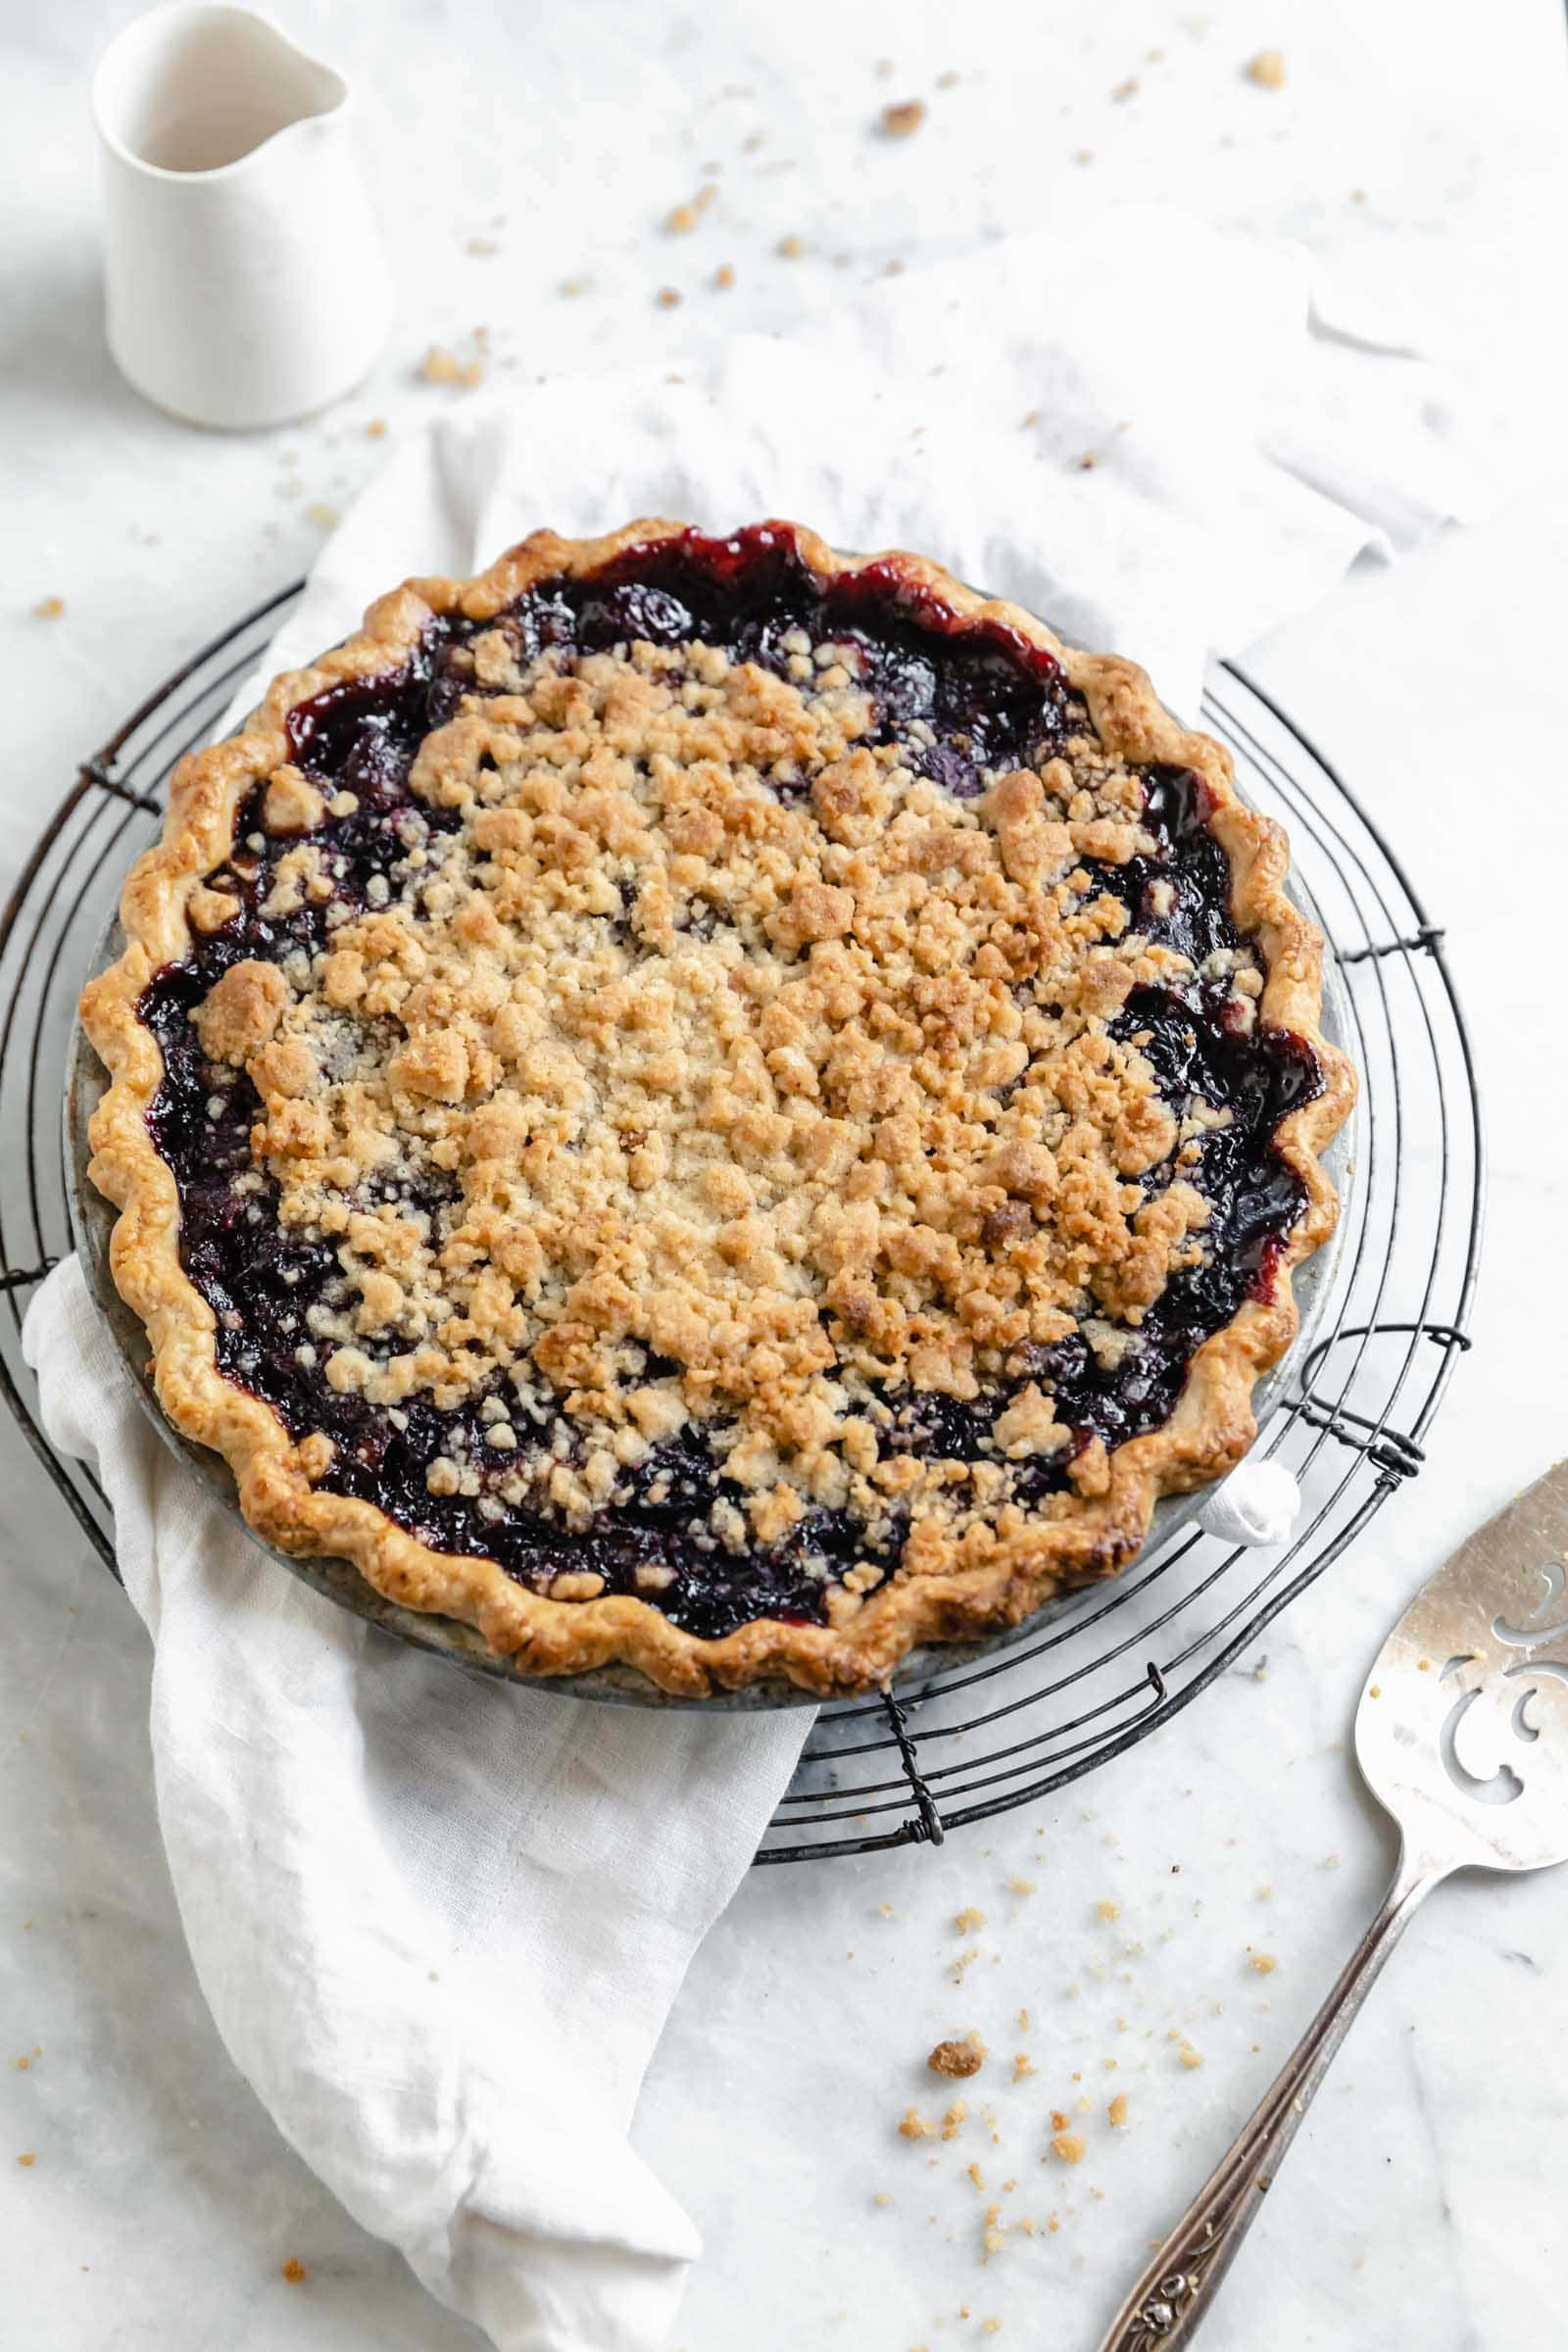 Introducing our favorite summer pie: Cherry Crumb Pie. A flaky pie crust filled with fresh cherries, and topped with crumble. The perfect cherry pie recipe!